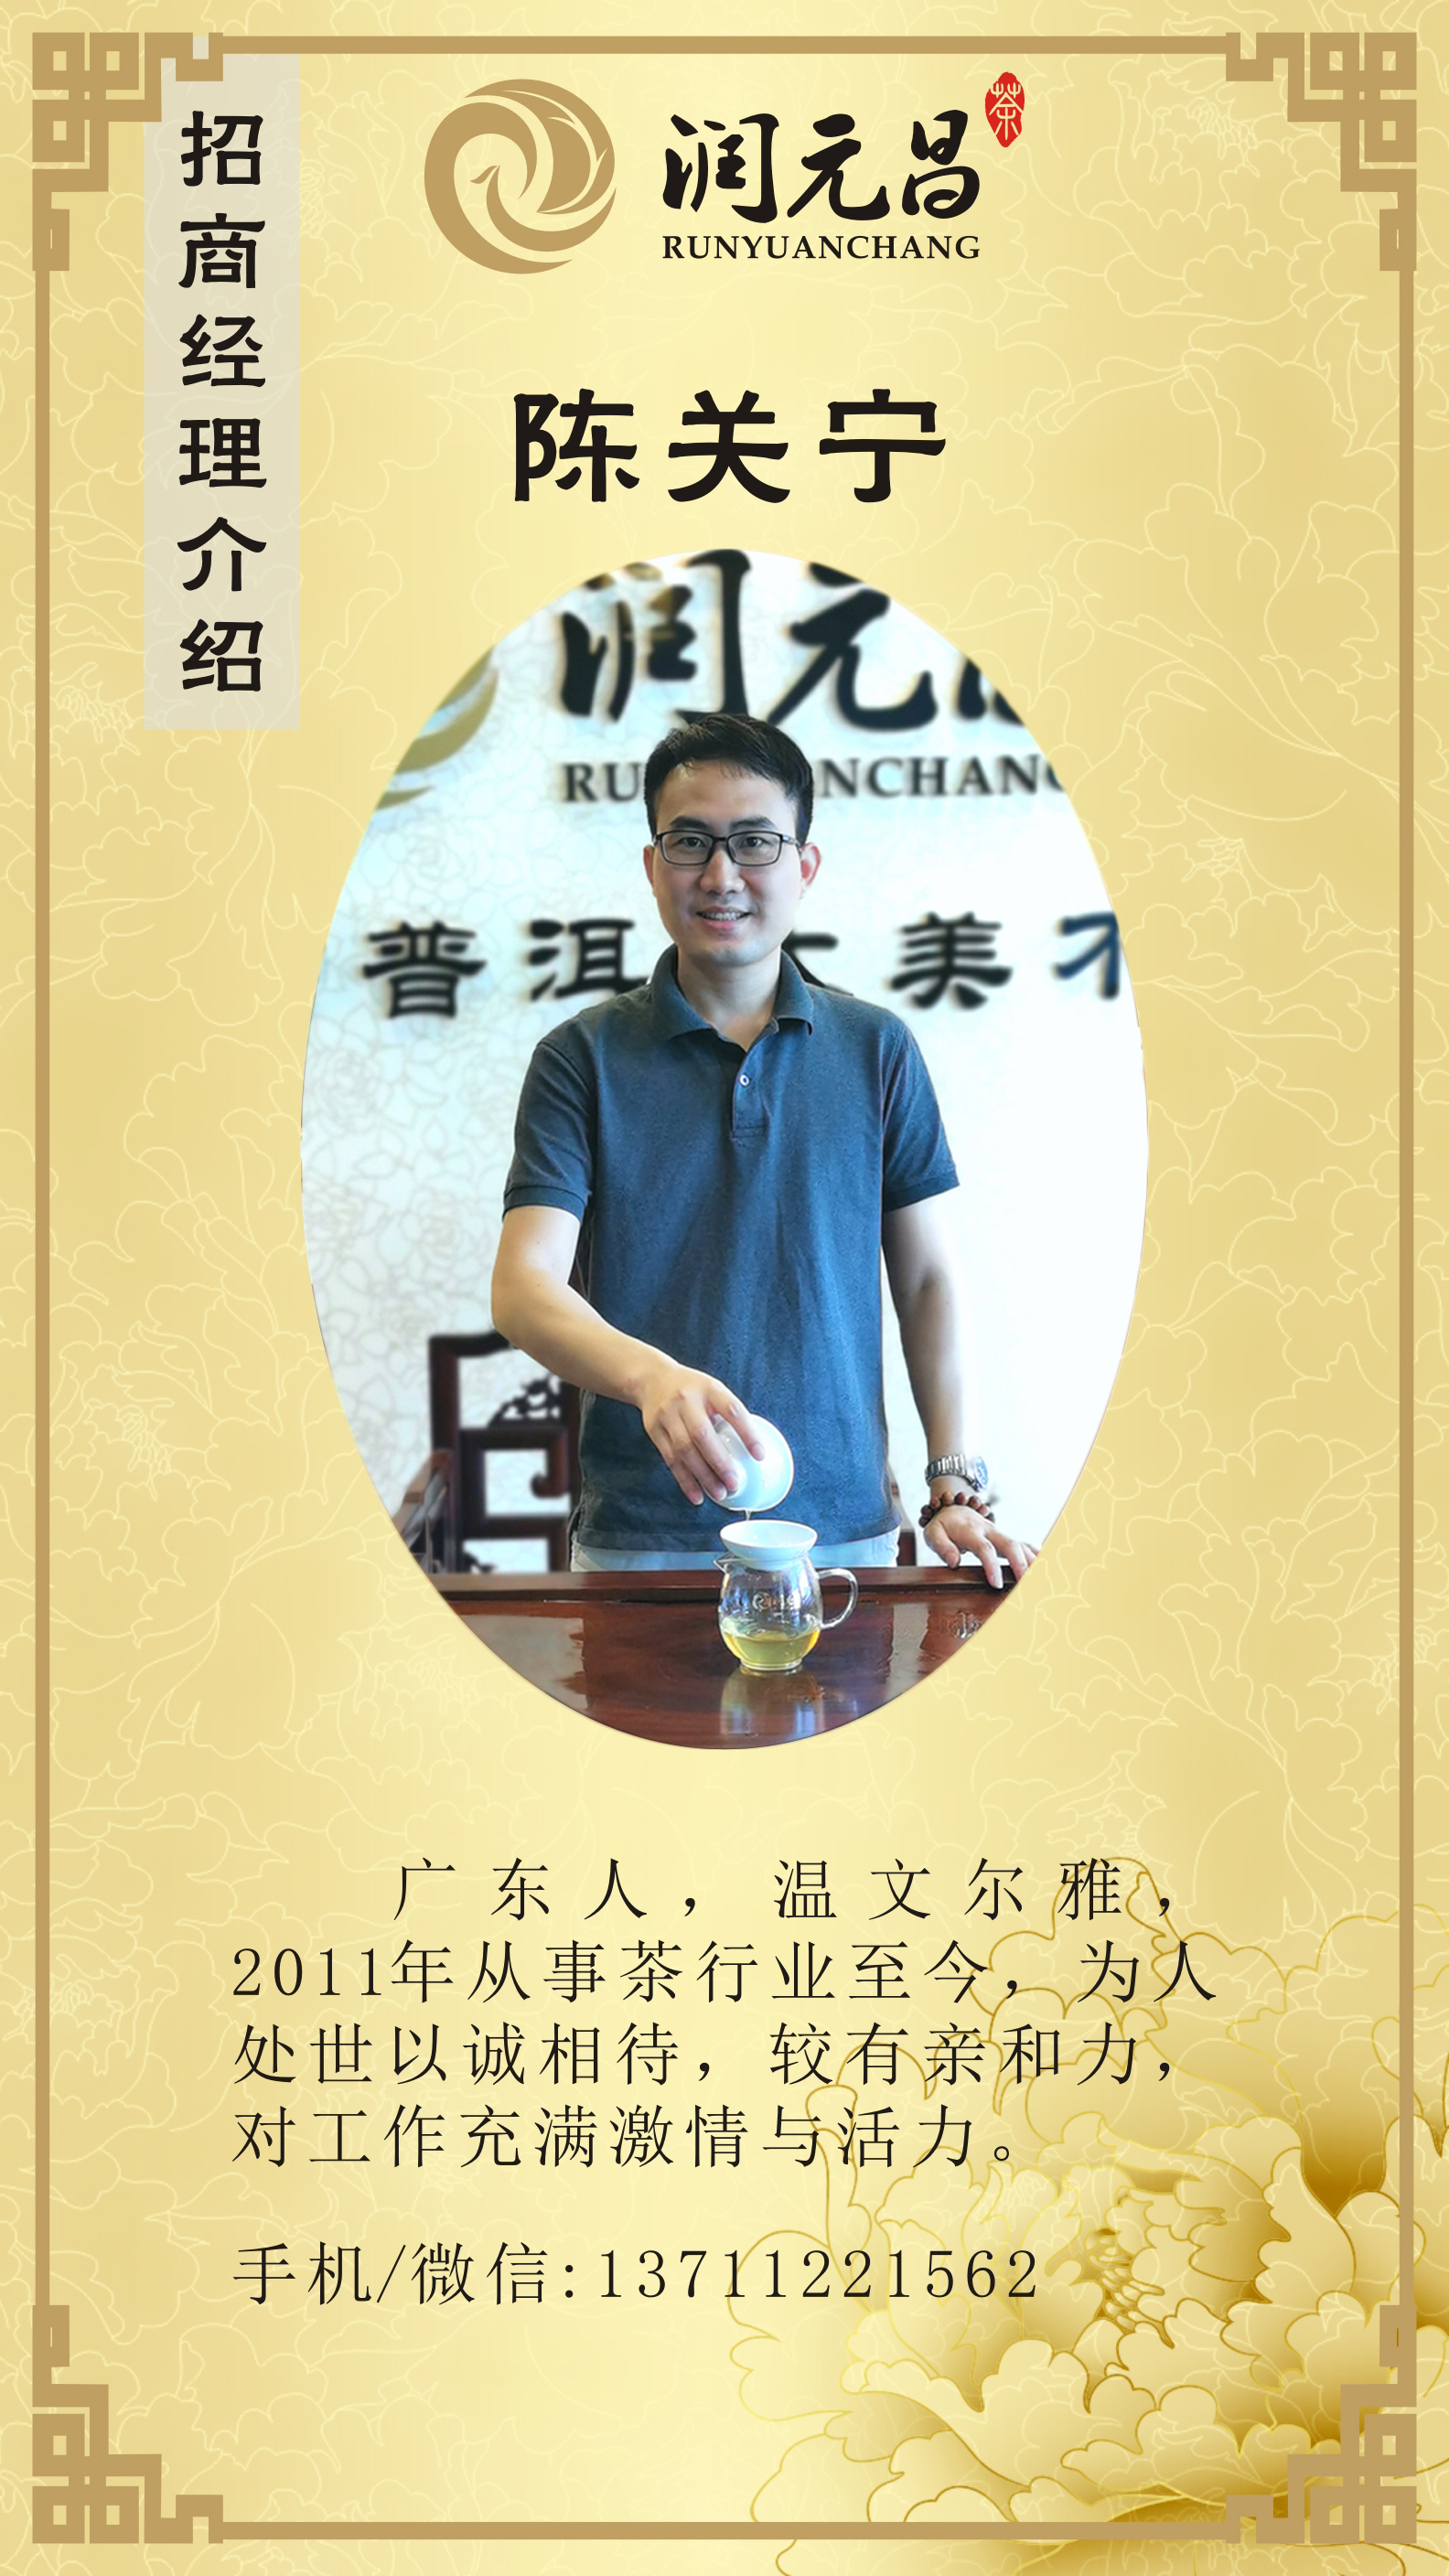  Chen Guanning, Investment Manager of Runyuanchang